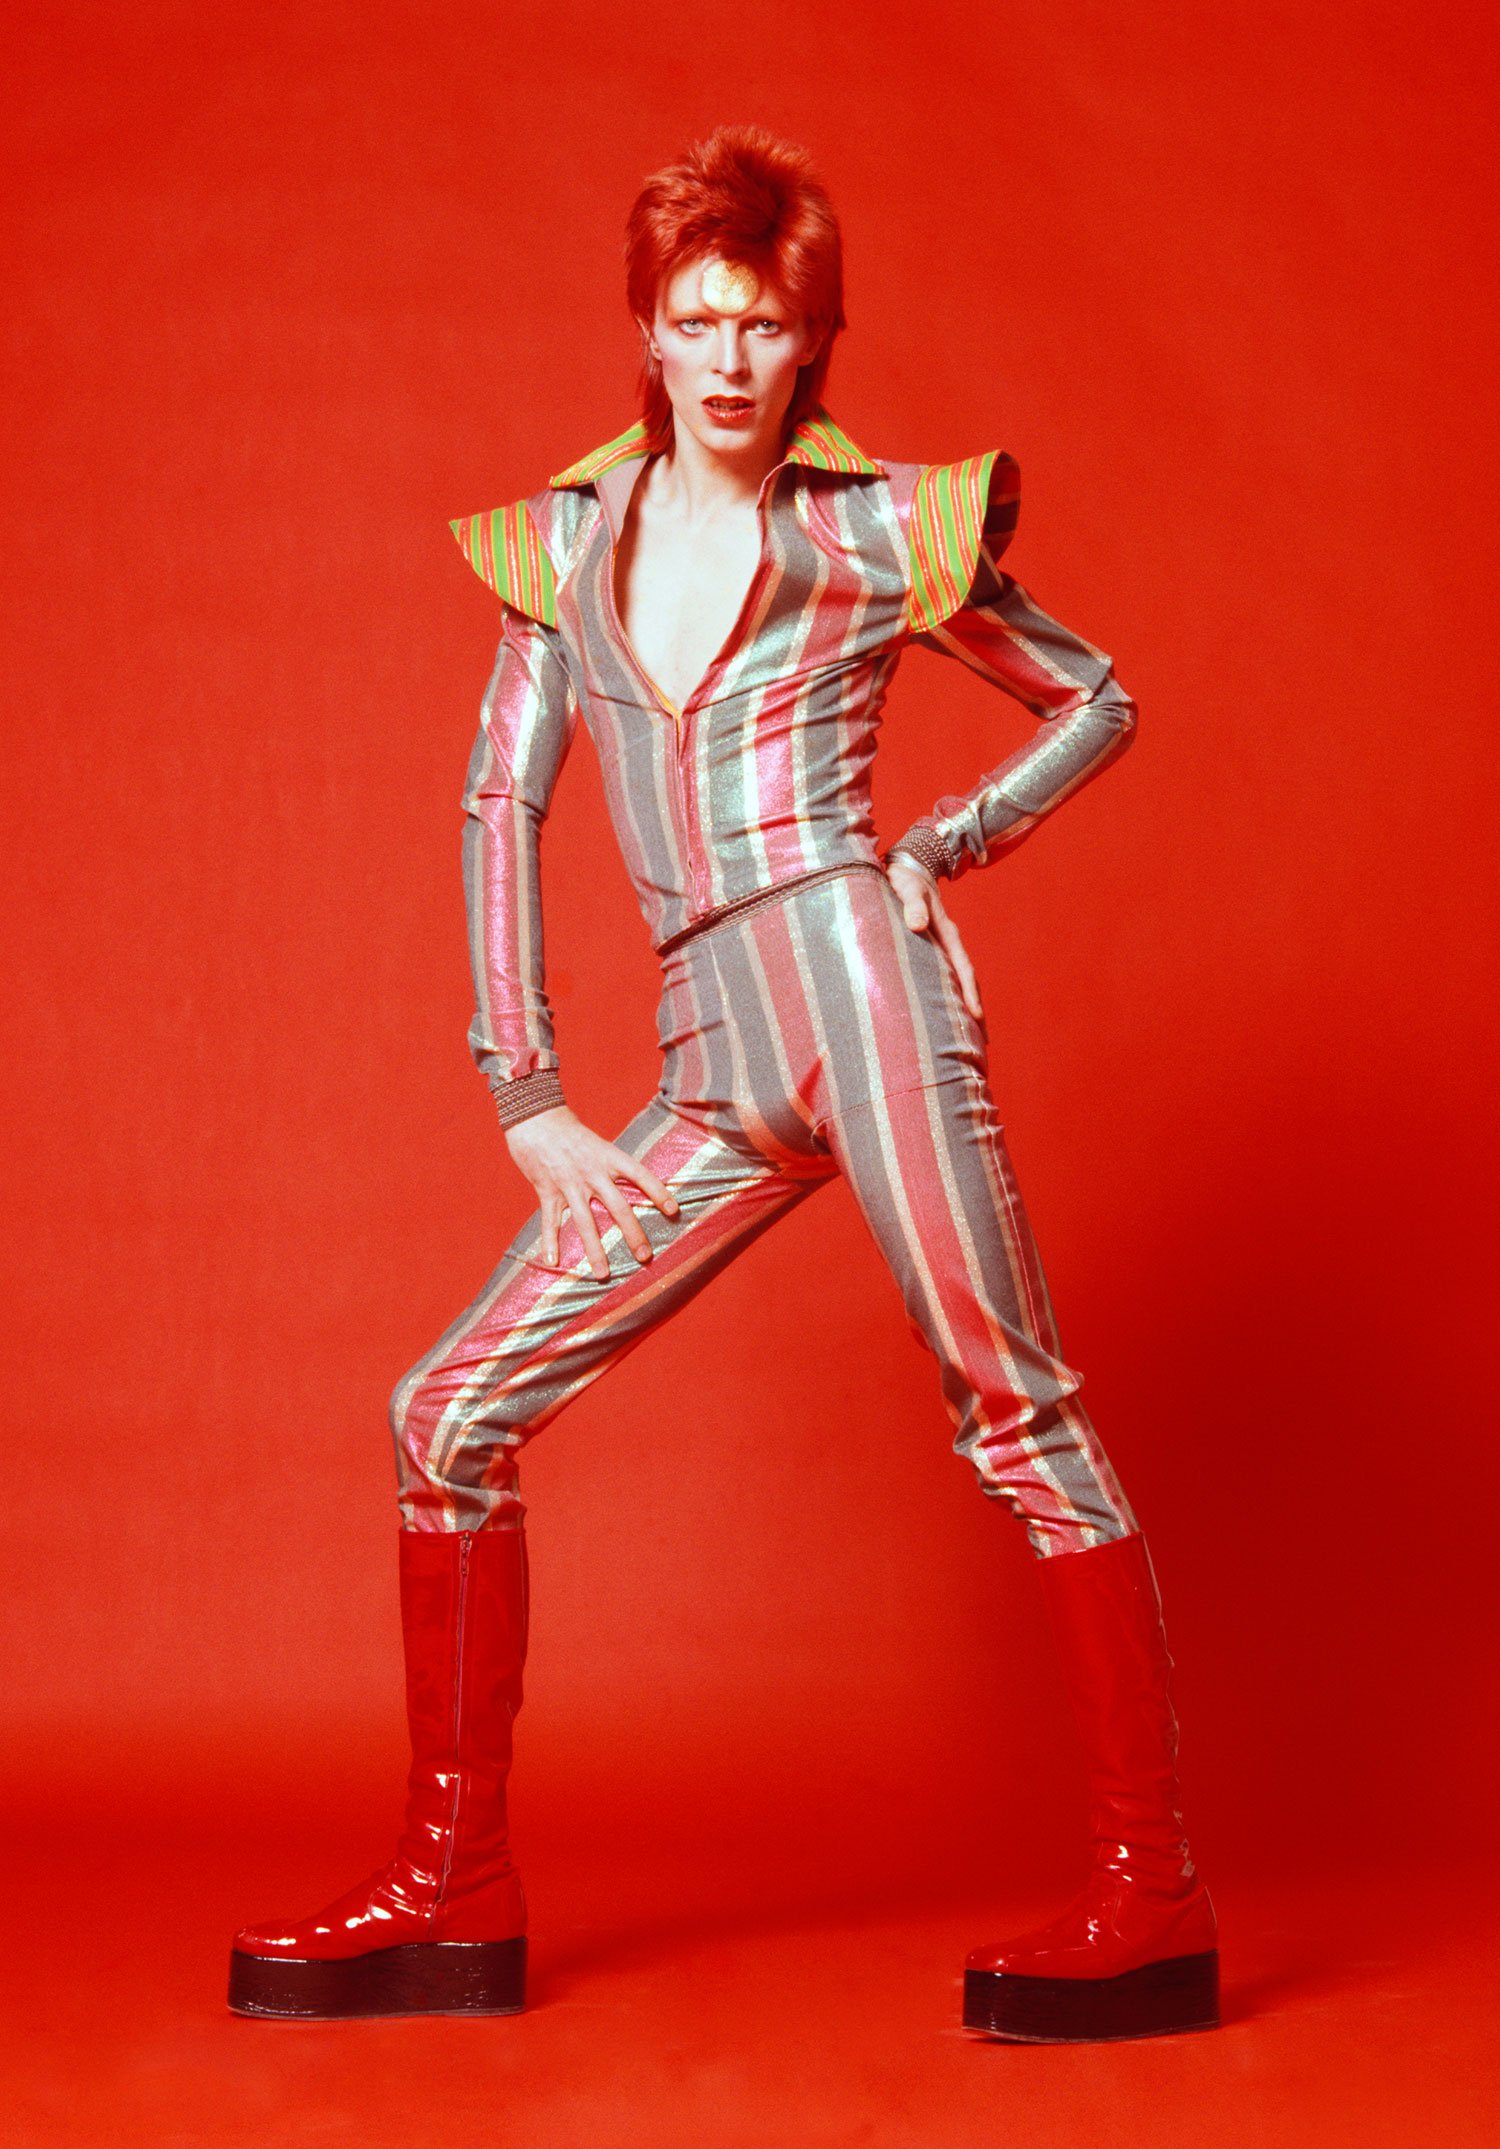  https://www.rollingstone.com/music/music-news/how-david-bowies-fashion-transformations-changed-the-world-53287/ 